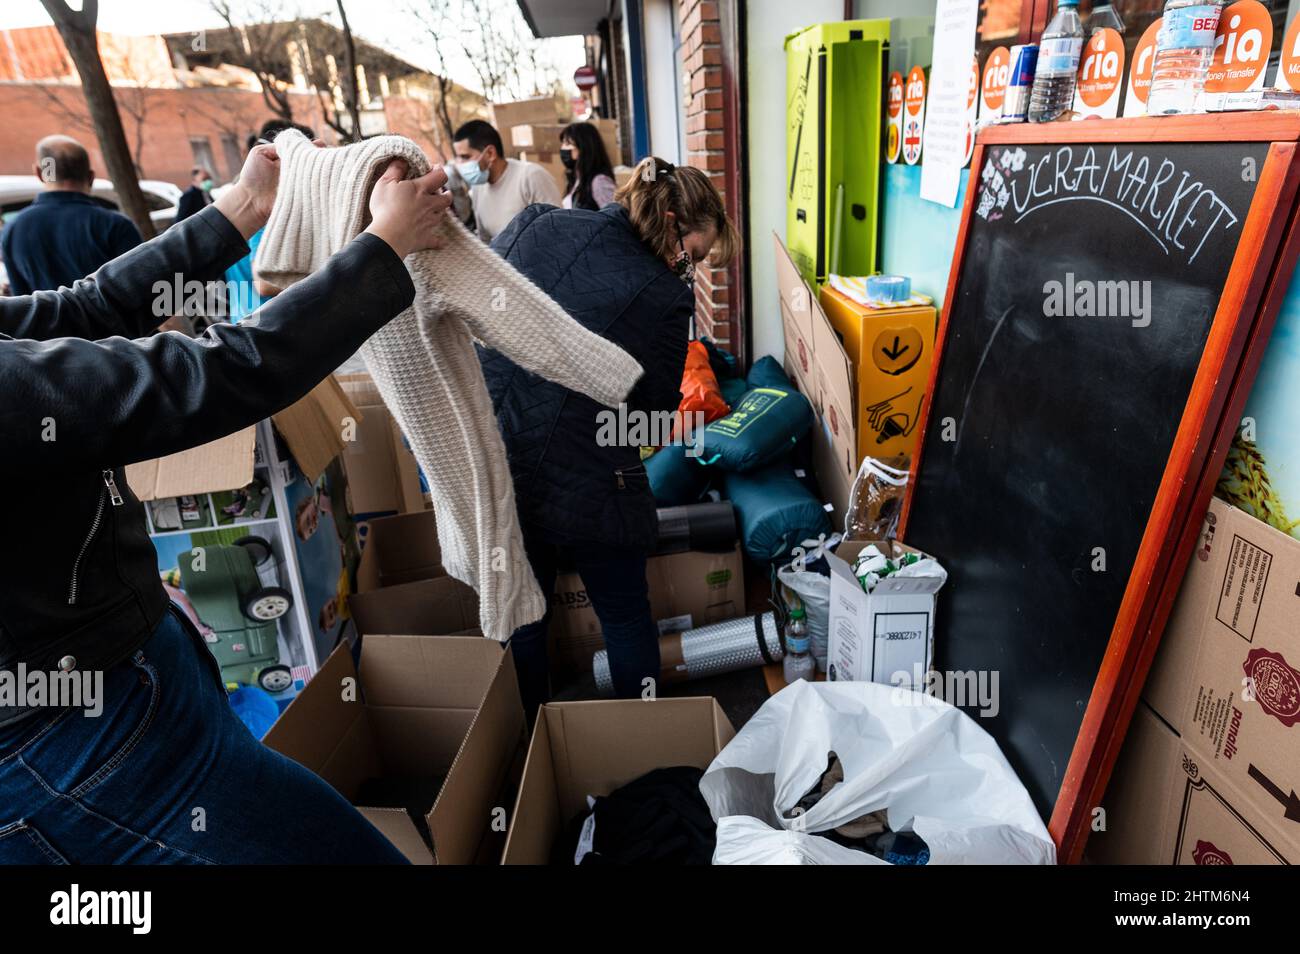 Madrid, Spain. 01st Mar, 2022. People organizing aid material for sending to Ukraine. The Ukrainian shop Ucramarket has become a center for receiving donations to send to Ukraine, receiving medicines, food, winter clothes and first aid kits. Credit: Marcos del Mazo/Alamy Live News Stock Photo